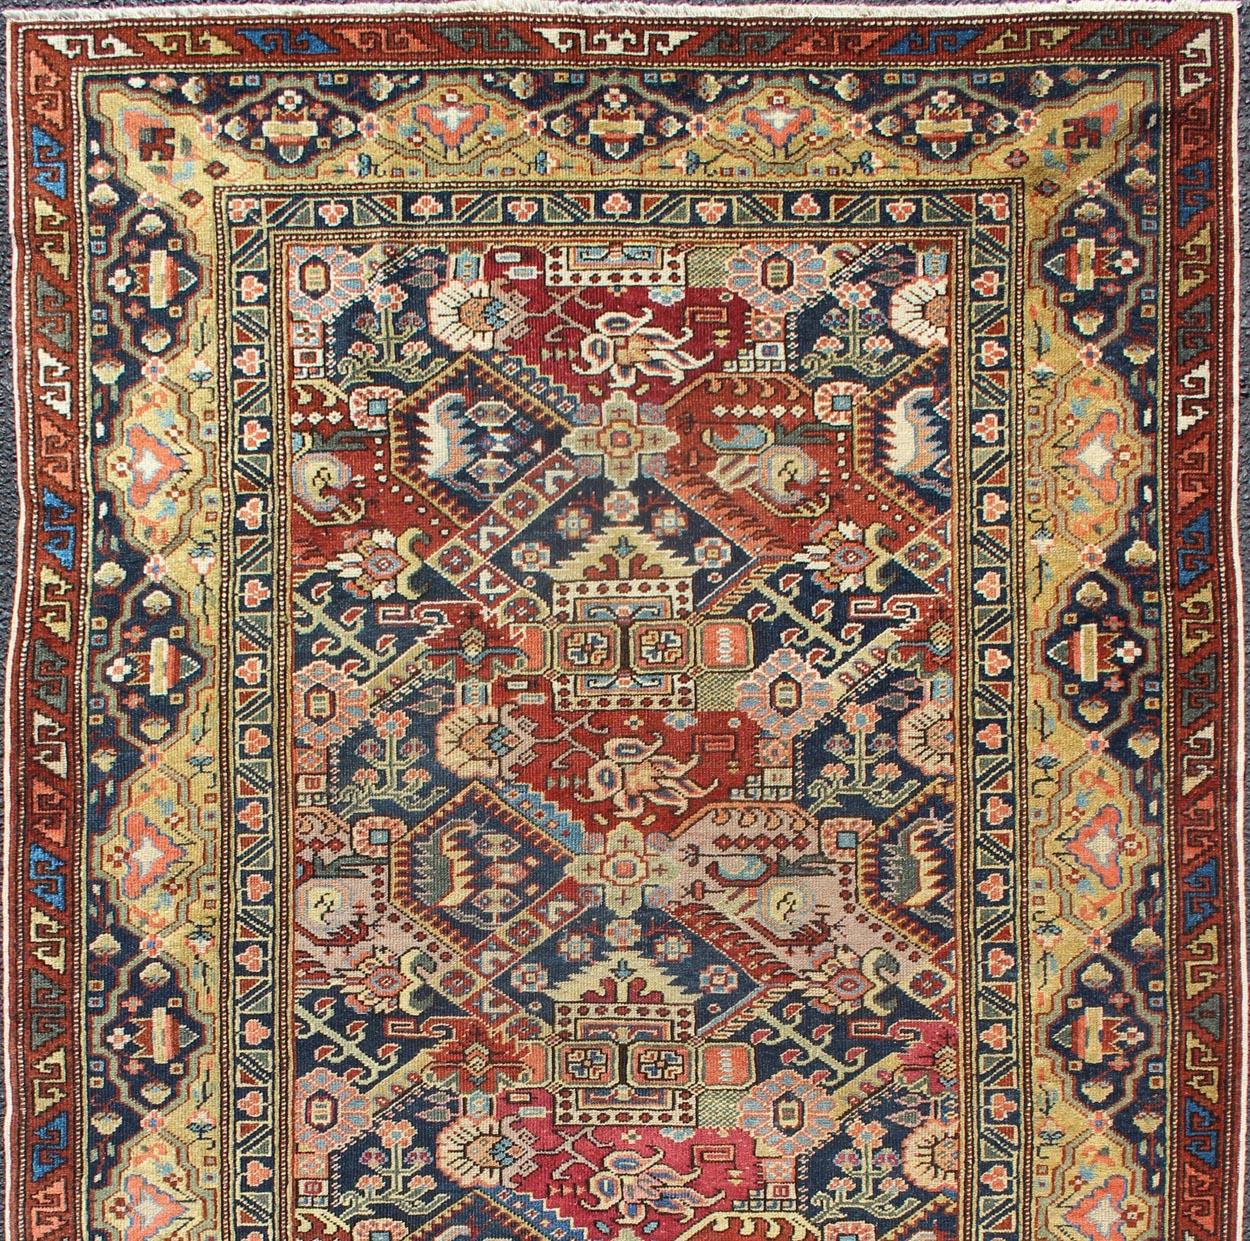 19th Century Exquisite Antique Caucasian Seychour Rug In Red's And Blue's.  Keivan Woven Arts / rug KBE-140401, country of origin / type: Caucus / Seychour, circa 1890.
Measures: 4'2 x 7'.
Seychour rugs are known for their heavily tribal designs.